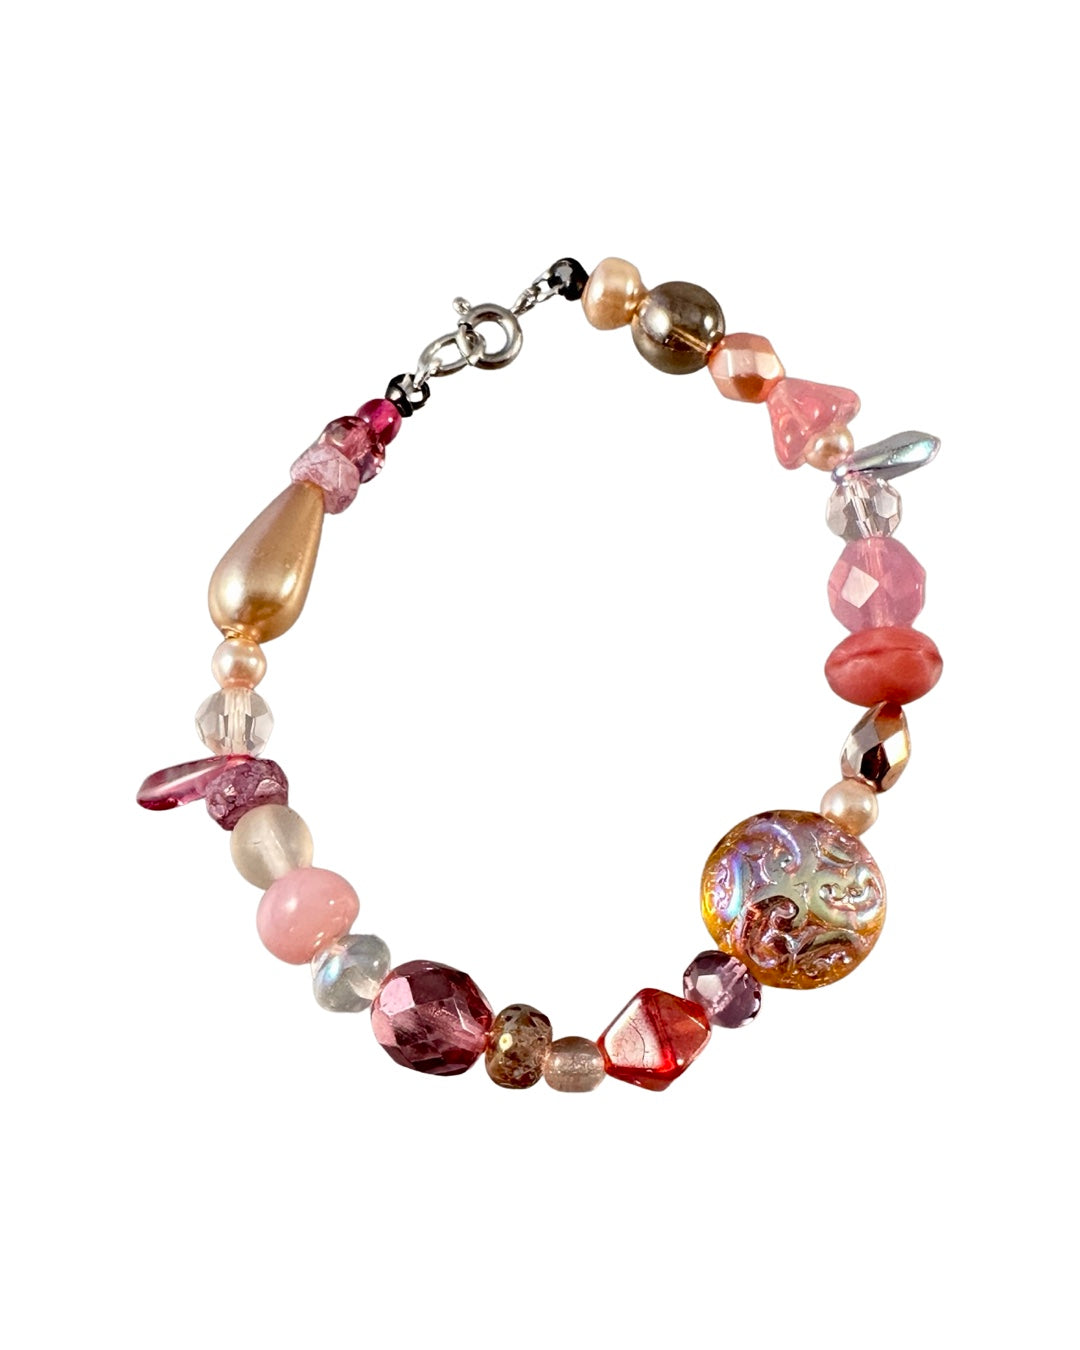 Faceted Crystal Bead Bracelet in Assorted Colors